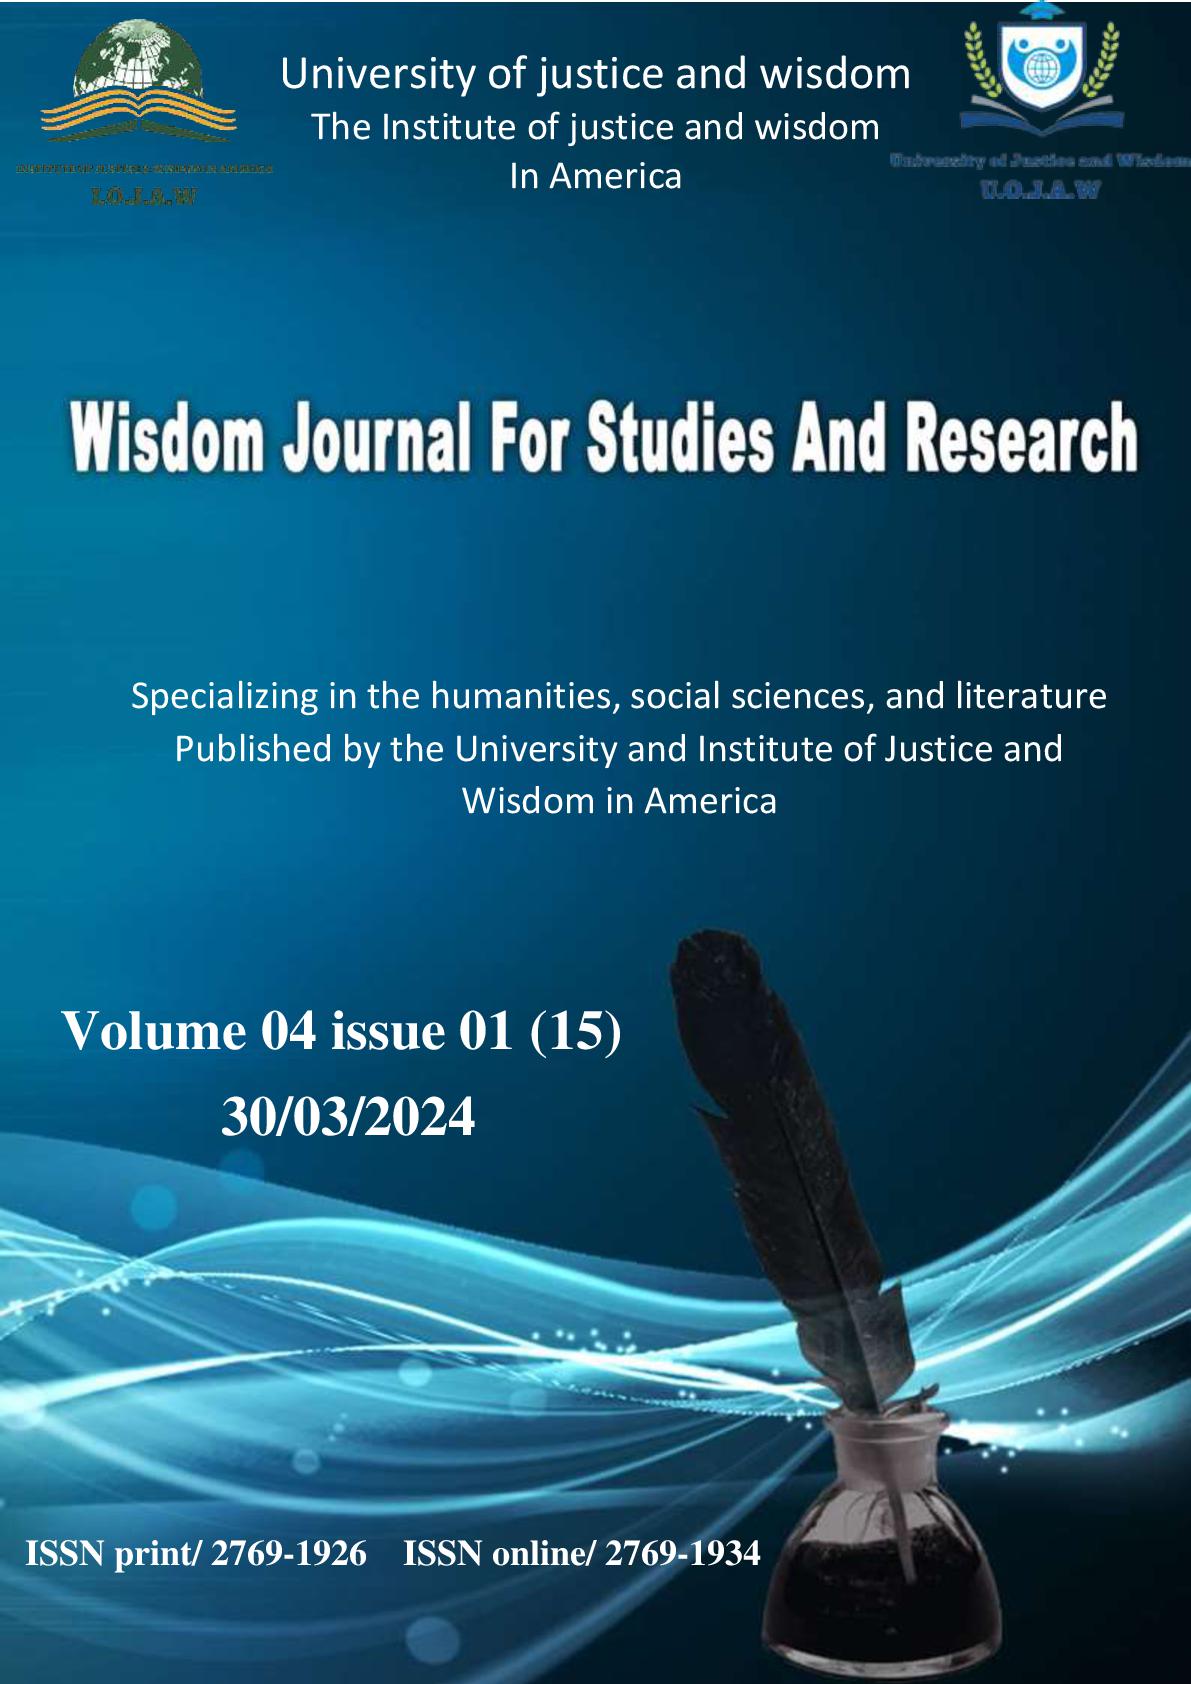 					View Vol. 4 No. 01 (2024): Wisdom Journal For Studies And Research volume 04 Issue 01(15) 30/03/2022
				